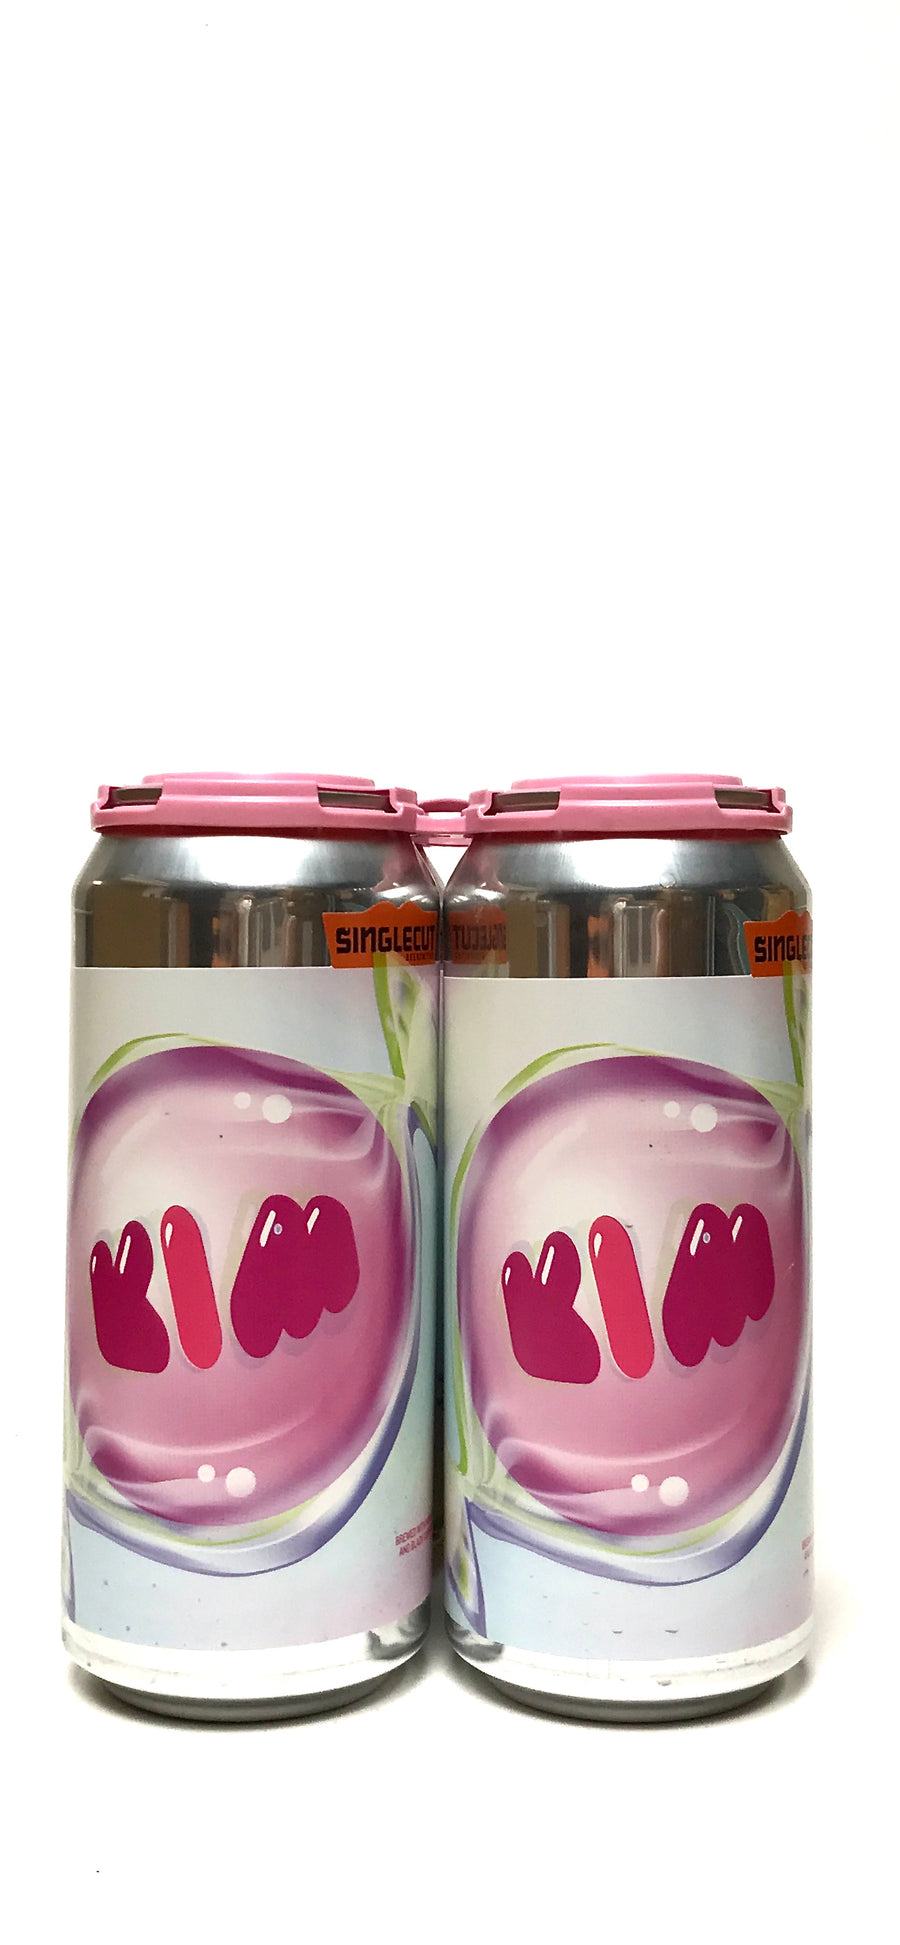 Singlecut Kim Hibiscus Sour Lager 16oz Can 4-Pack